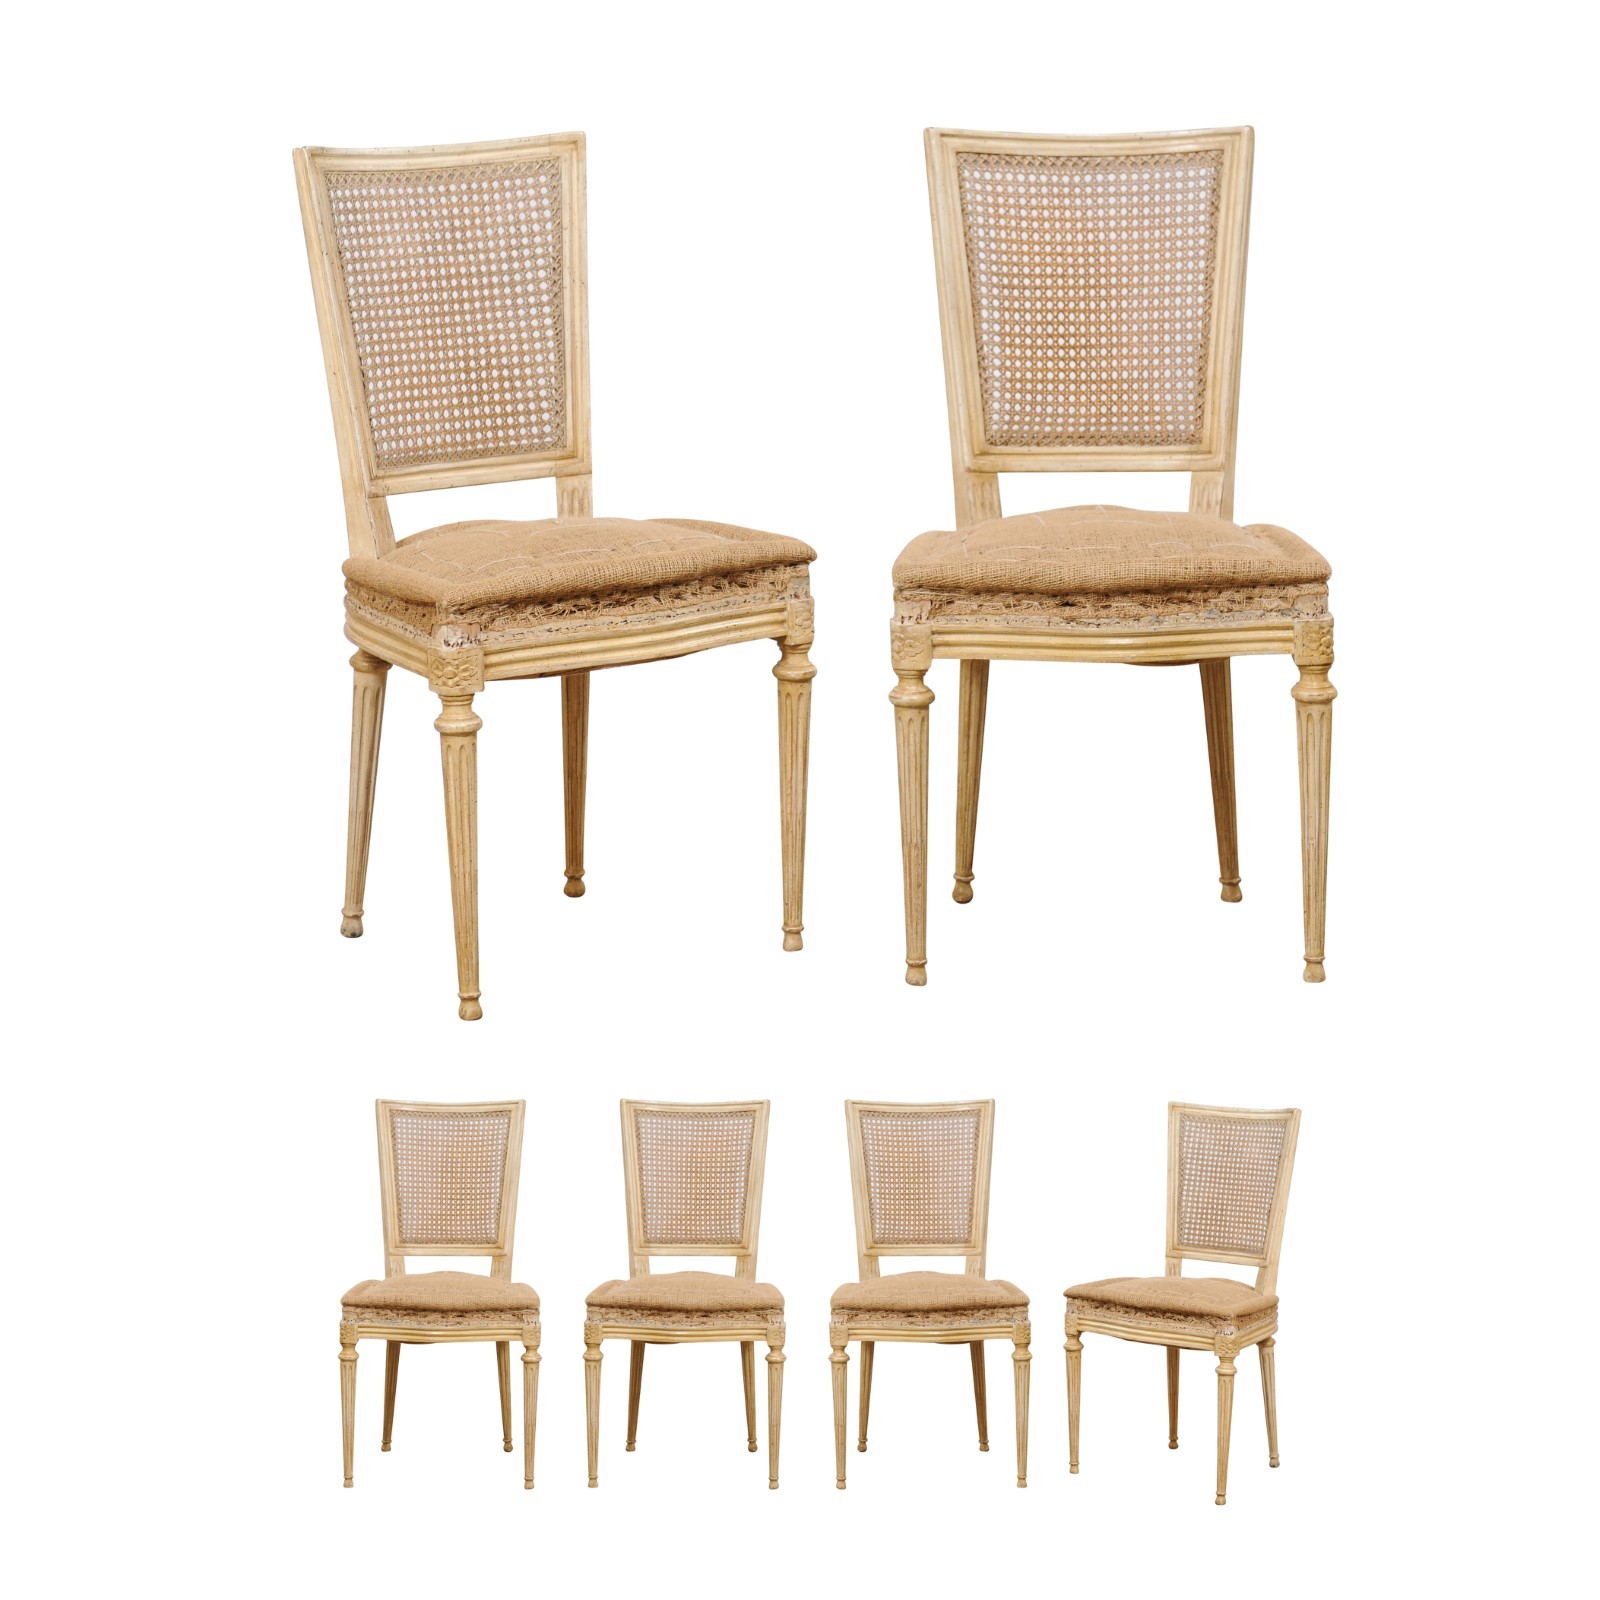 French Antique Set of 6 Cane Back Chairs